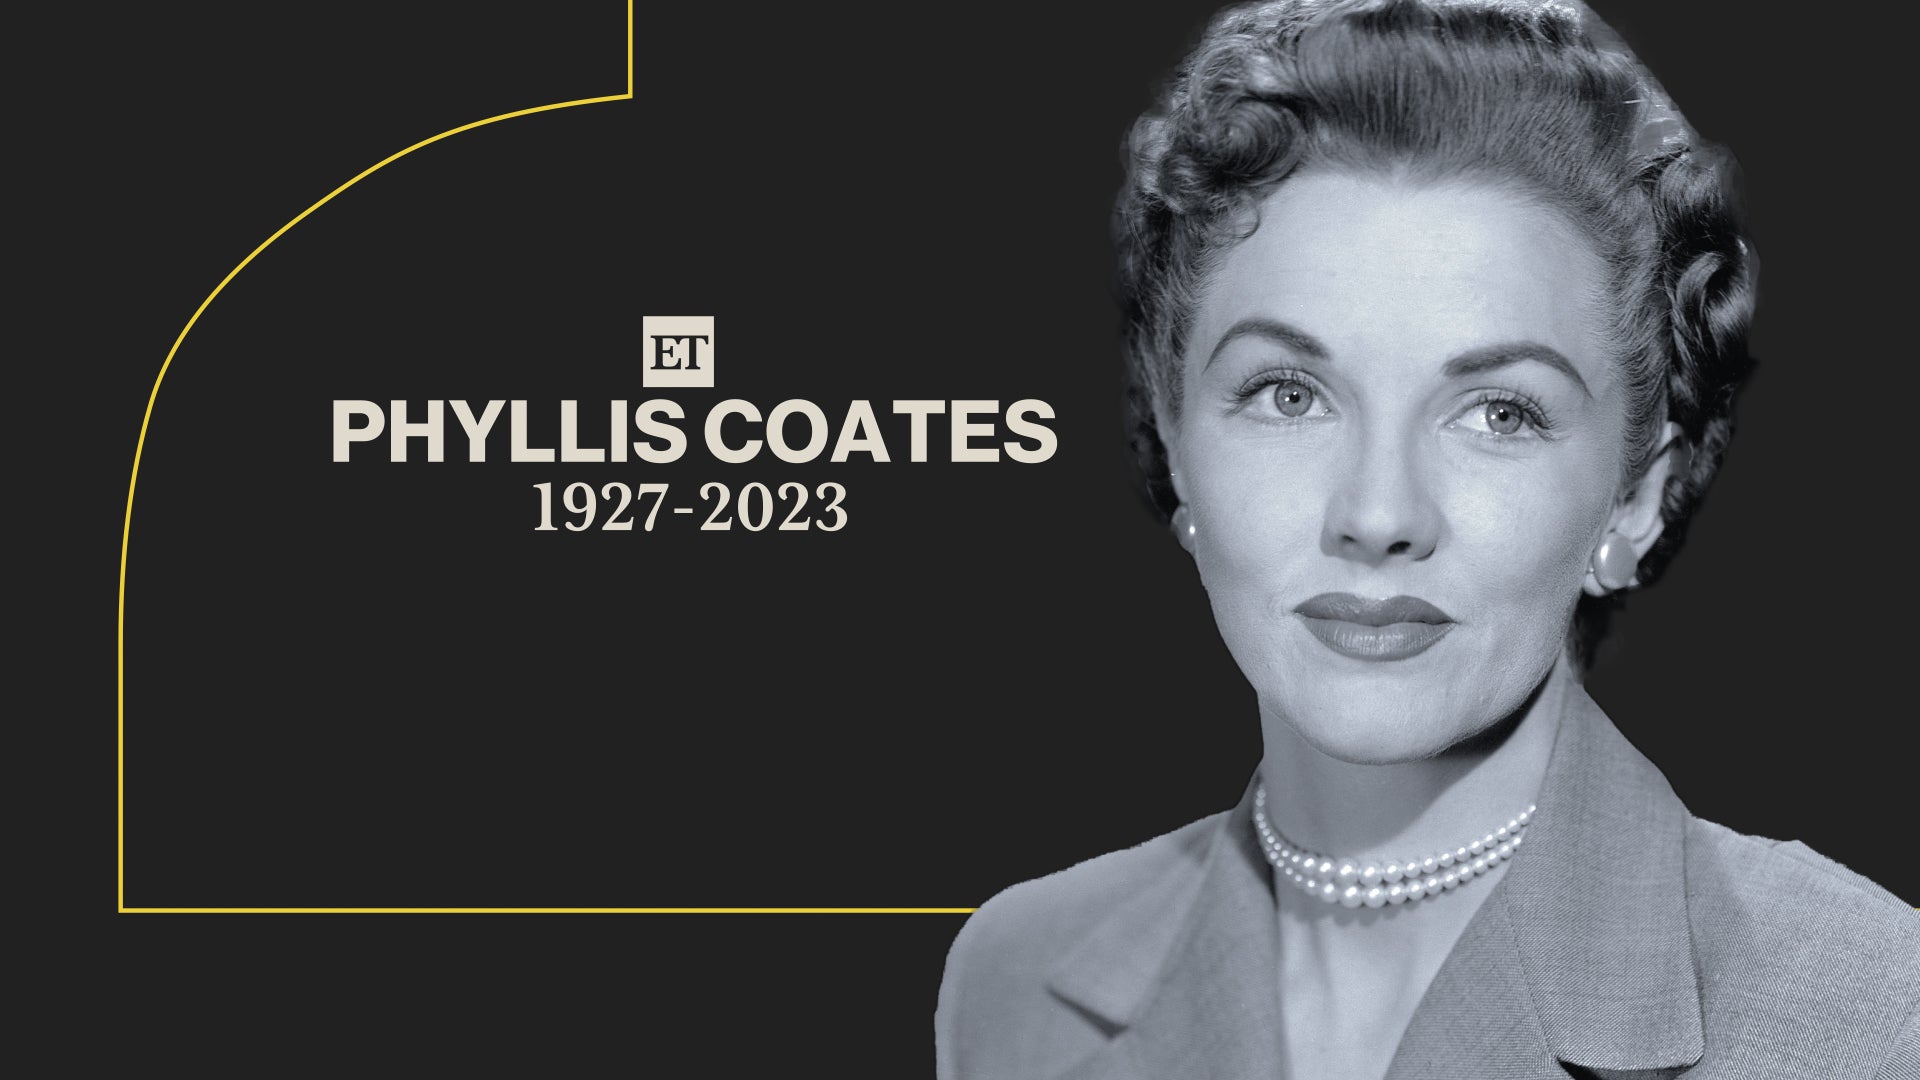 Phyllis Coates, Original Lois Lane From 'Adventures of Superman,' Dead at 96